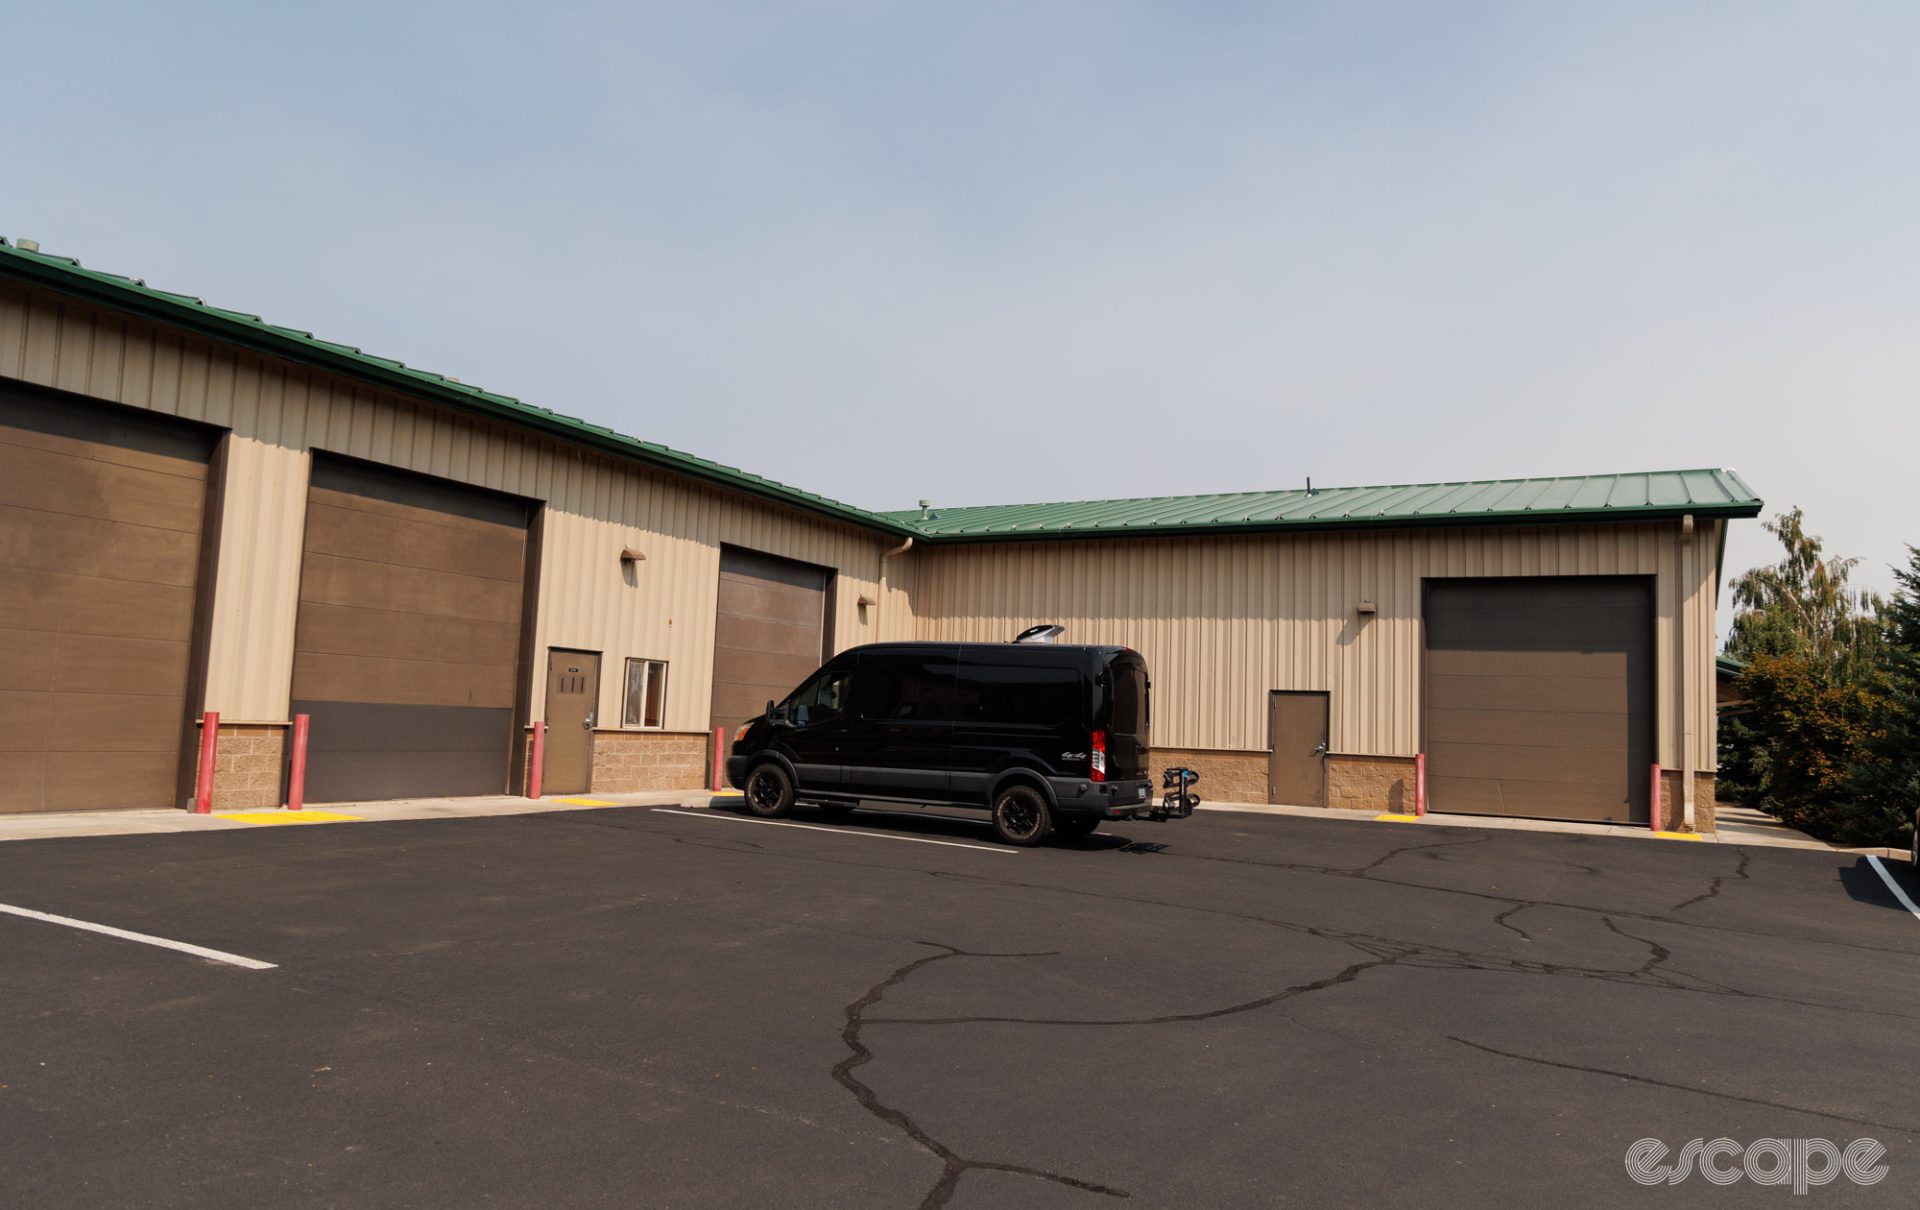 The outside of Abbey Bike Tools' new factory. It's a basic industrial building with no hint of what lies within.